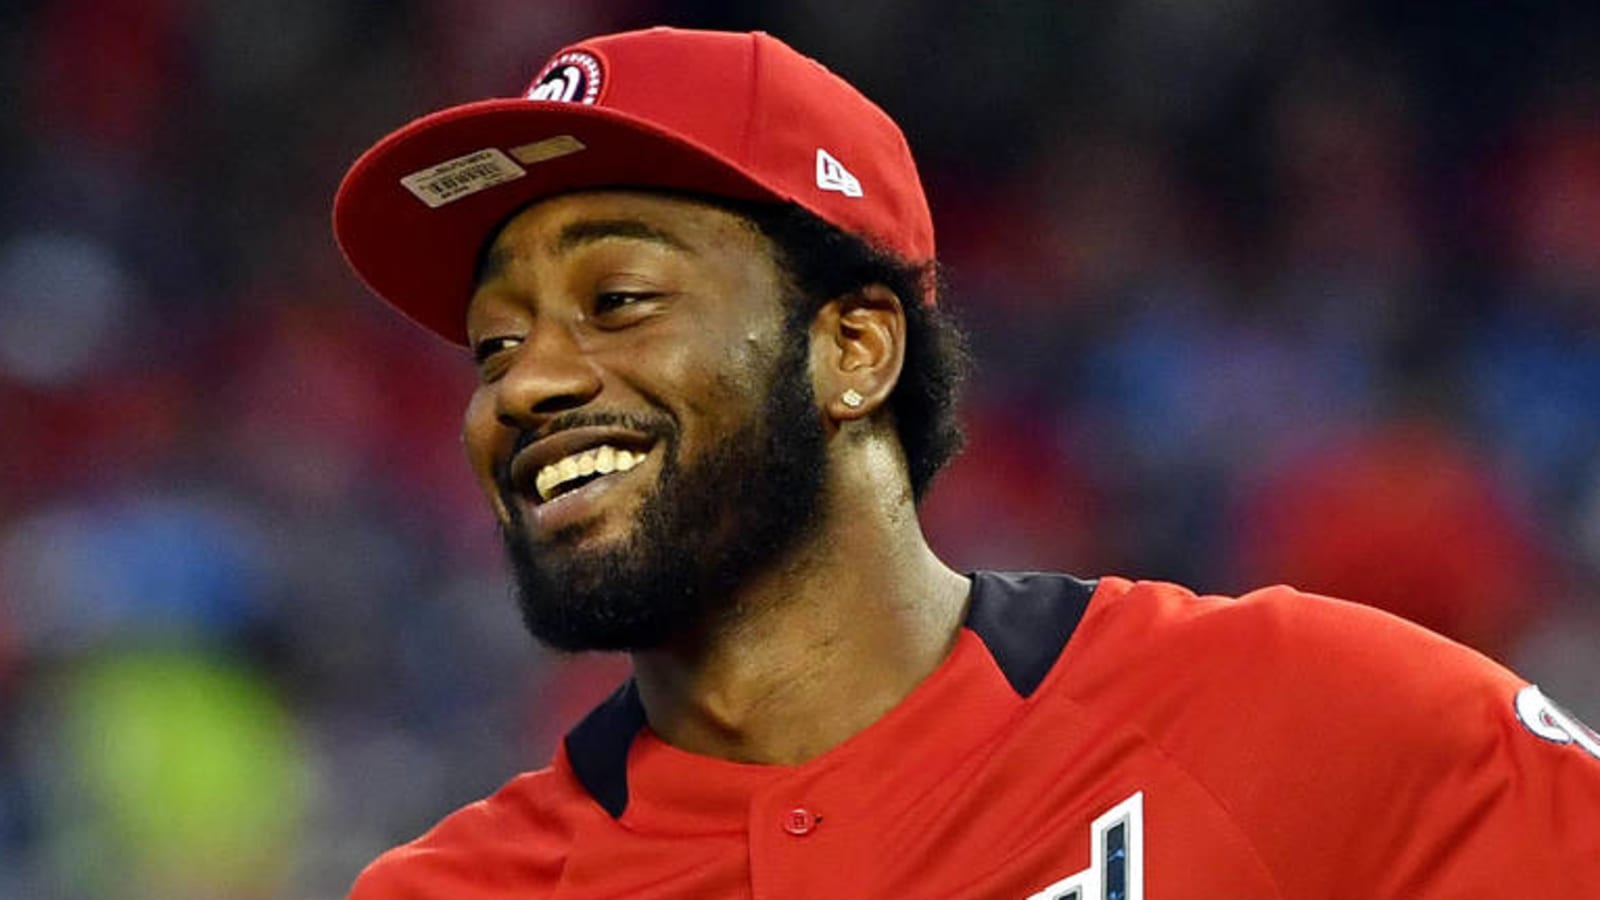 John Wall’s mother had funny comment about viral photo